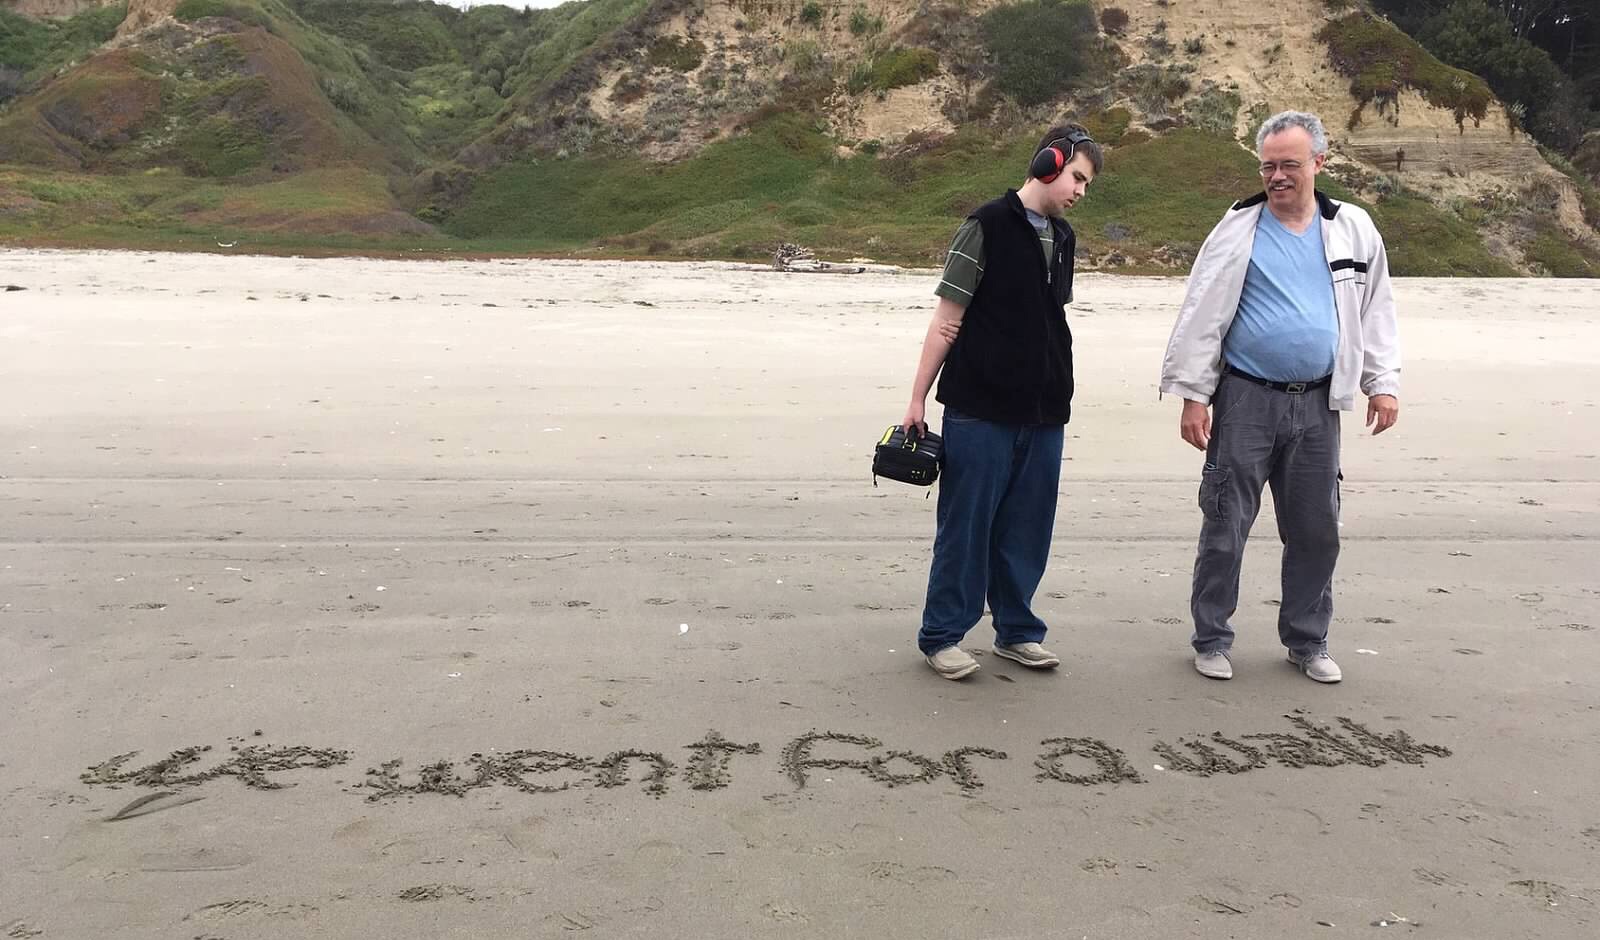 A student and a teacher at the beach with the sentence 'We went for a walk' written in the sand in front of them